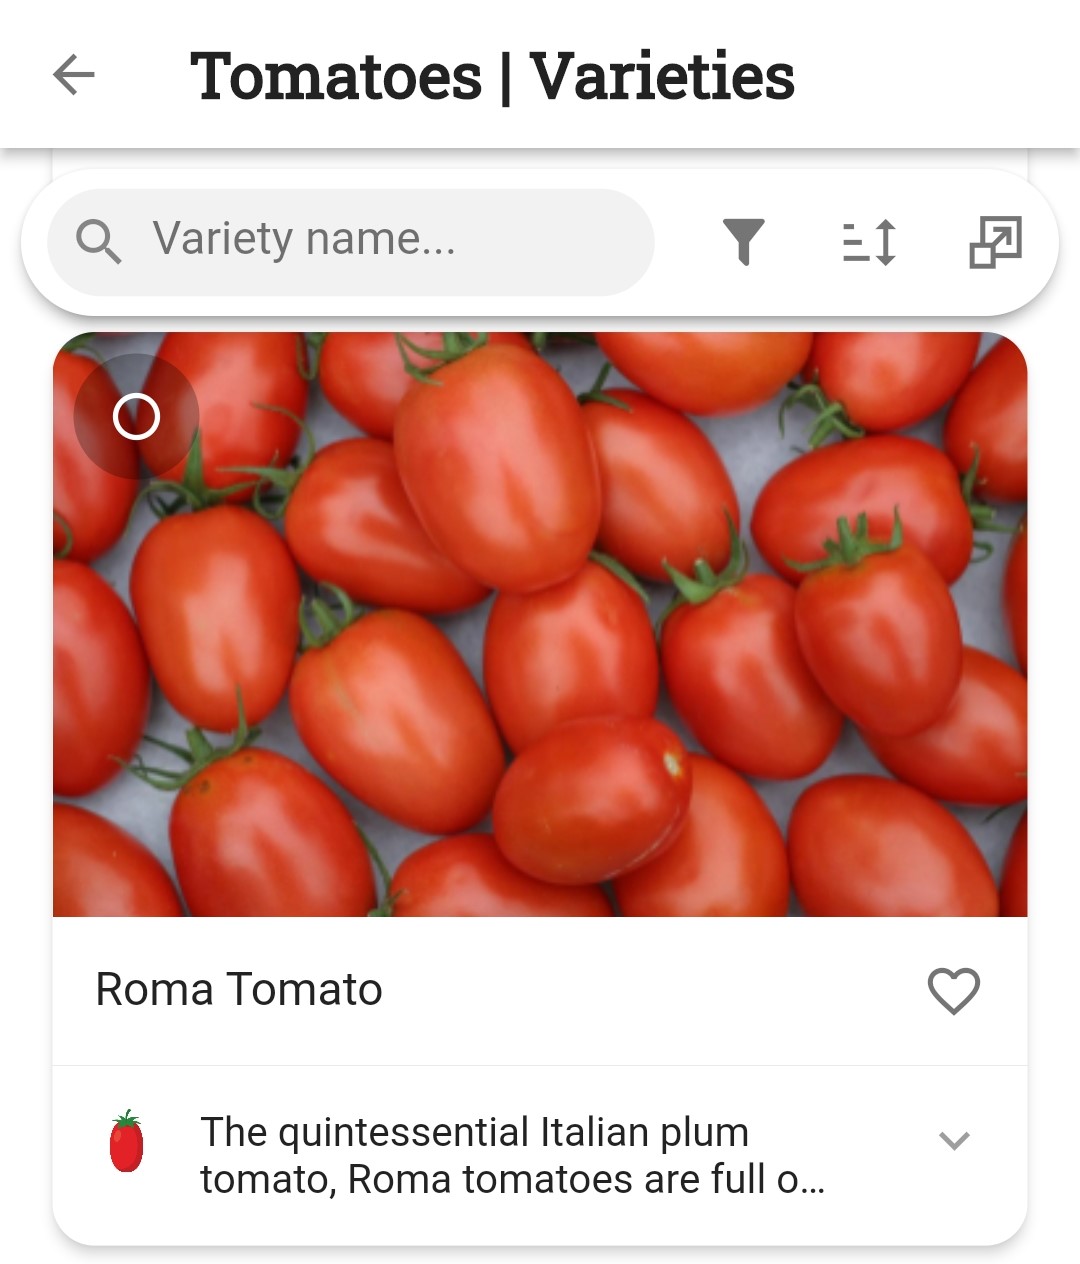 Screenshot showing Roma tomatoes as the selected variety